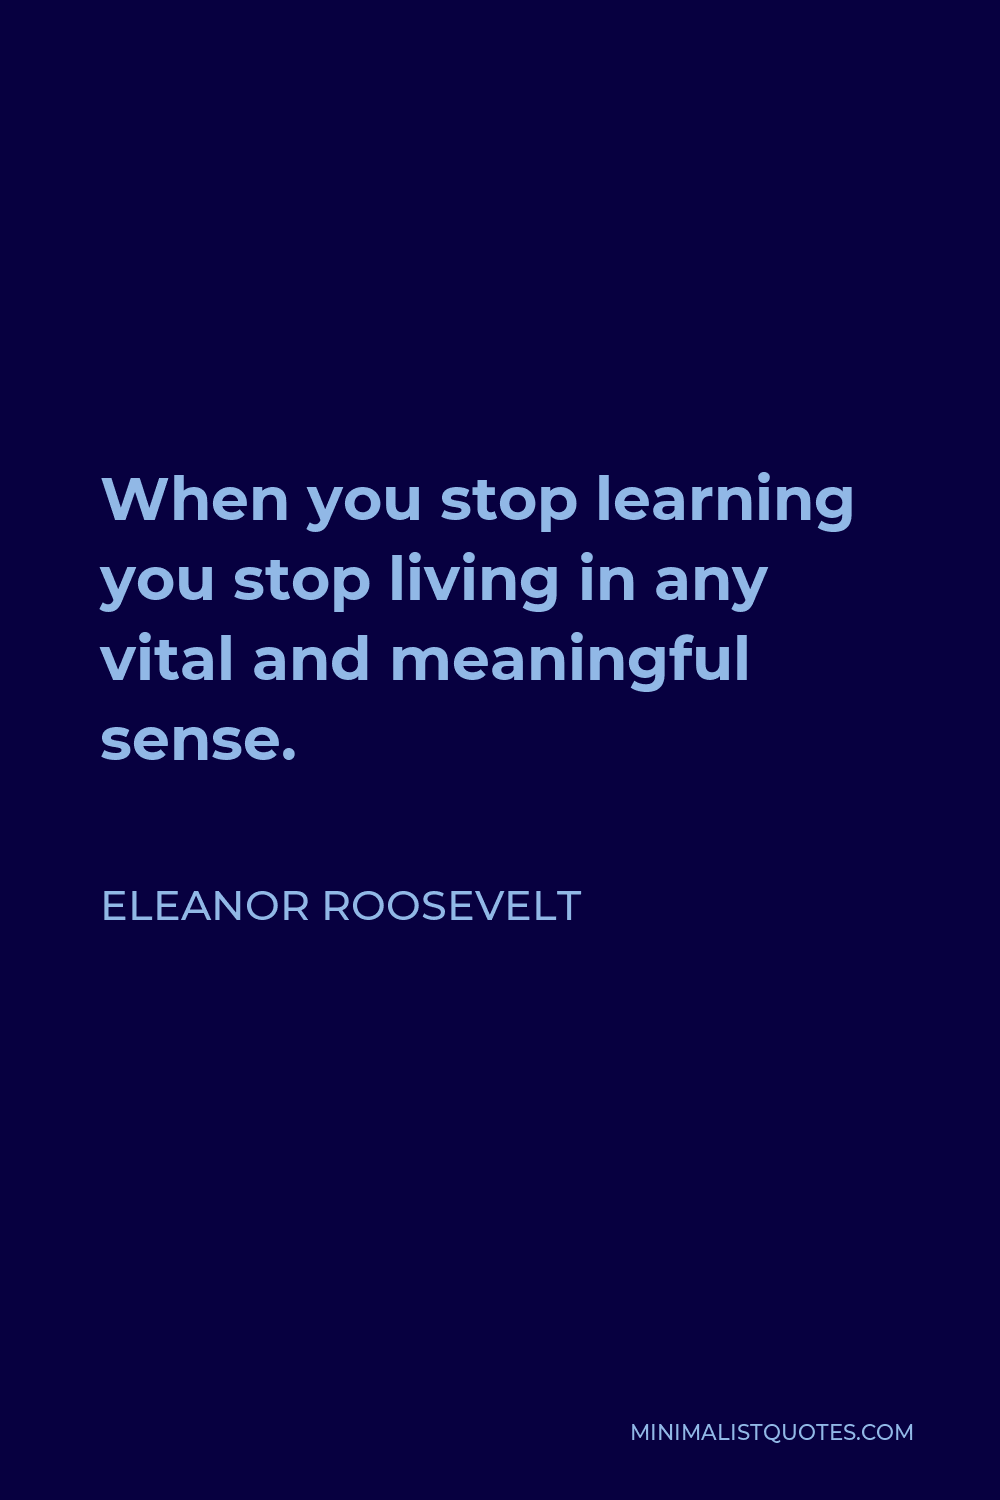 Eleanor Roosevelt Quote - When you stop learning you stop living in any vital and meaningful sense.